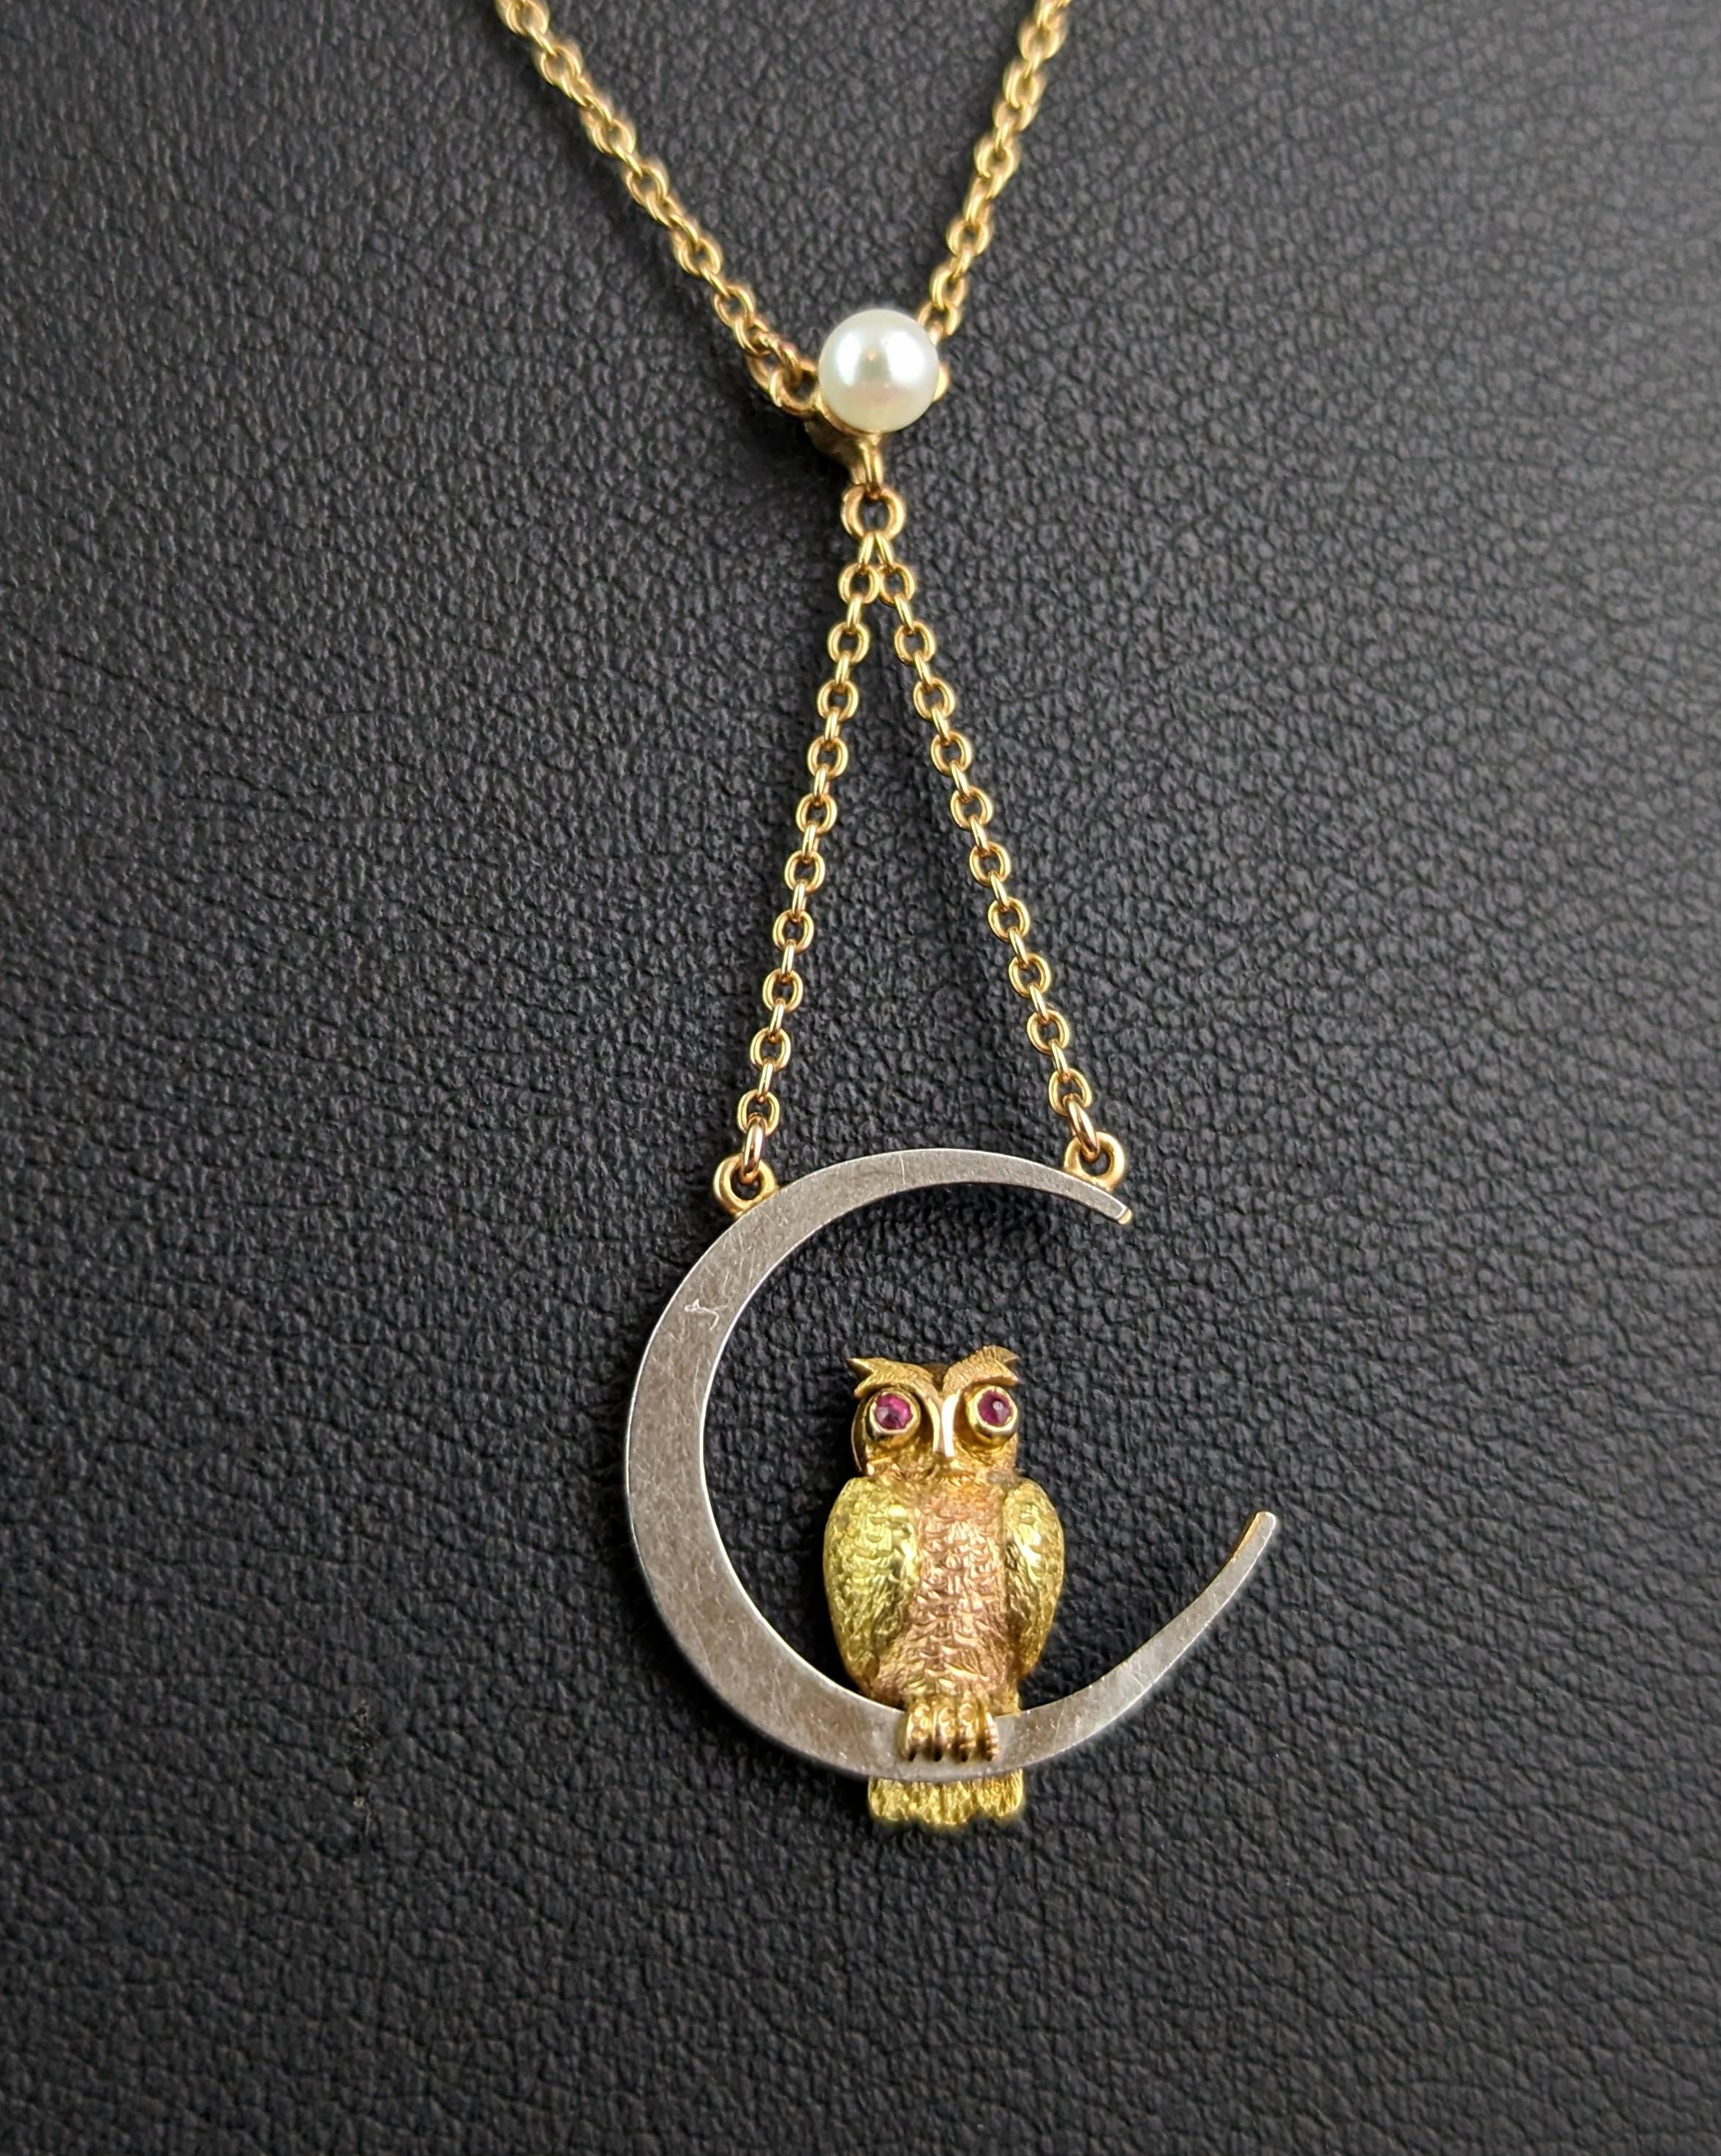 You can't help but be enchanted by this beautiful and rare antique owl and crescent moon pendant necklace.

Did you ever come across such a beautiful and symbolic piece of antique jewellery?!

This magnificent necklace is a Y shaped pendant drop